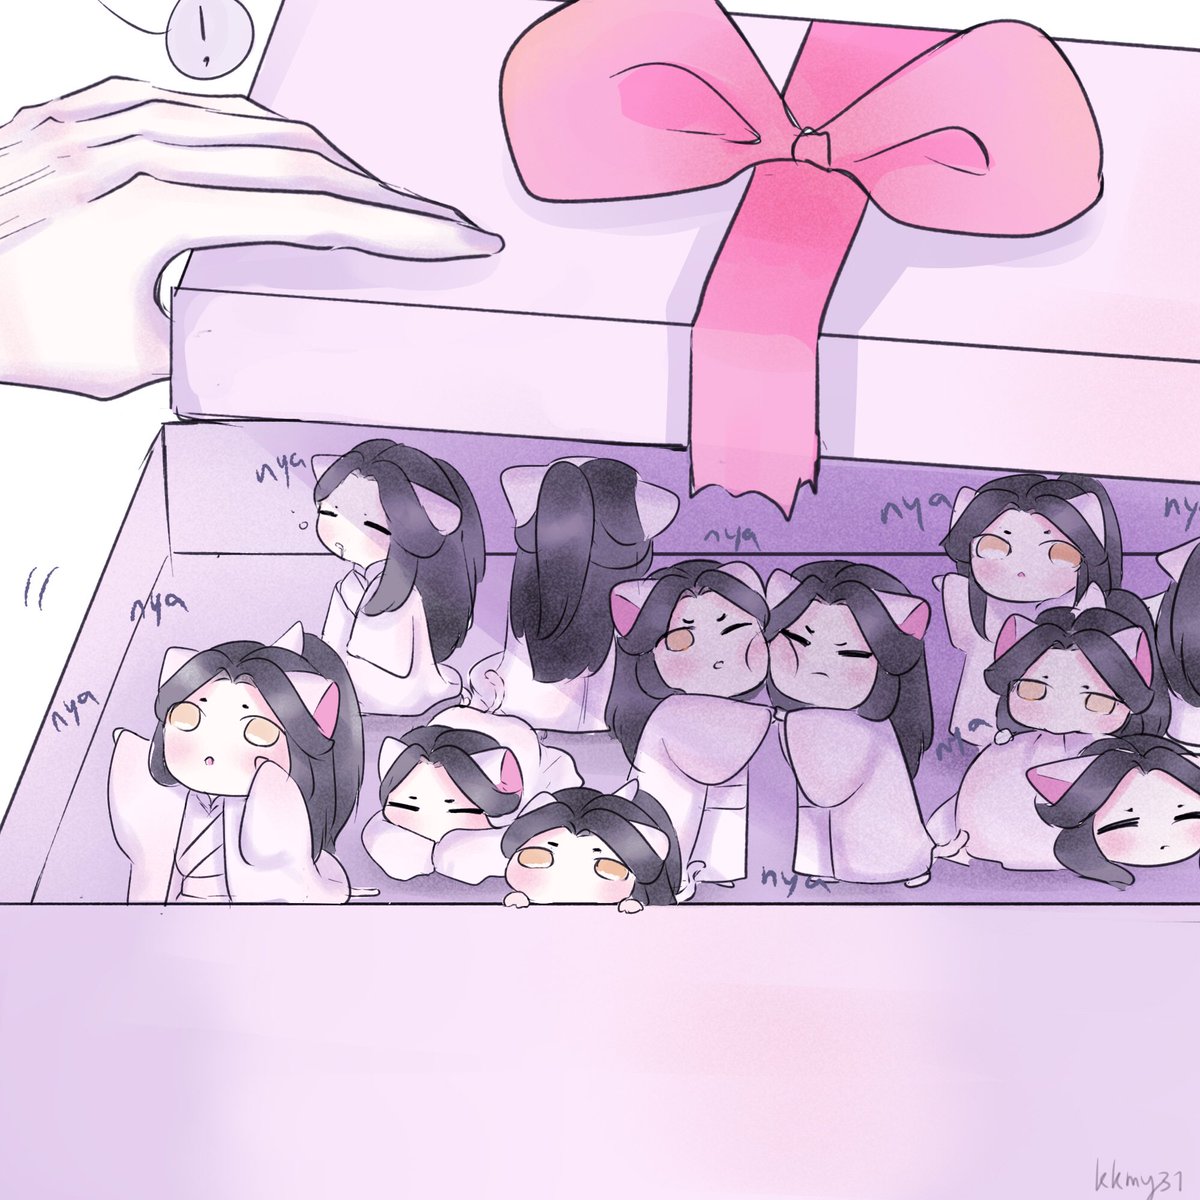 More gifts to Moran! I unfortunately don’t have anything else to give you other than this lame lil comic xD enjoy your nyannings hahaha ~

#墨燃0409生日快乐 #HappyMoRanDay   #二哈和他的白猫师尊